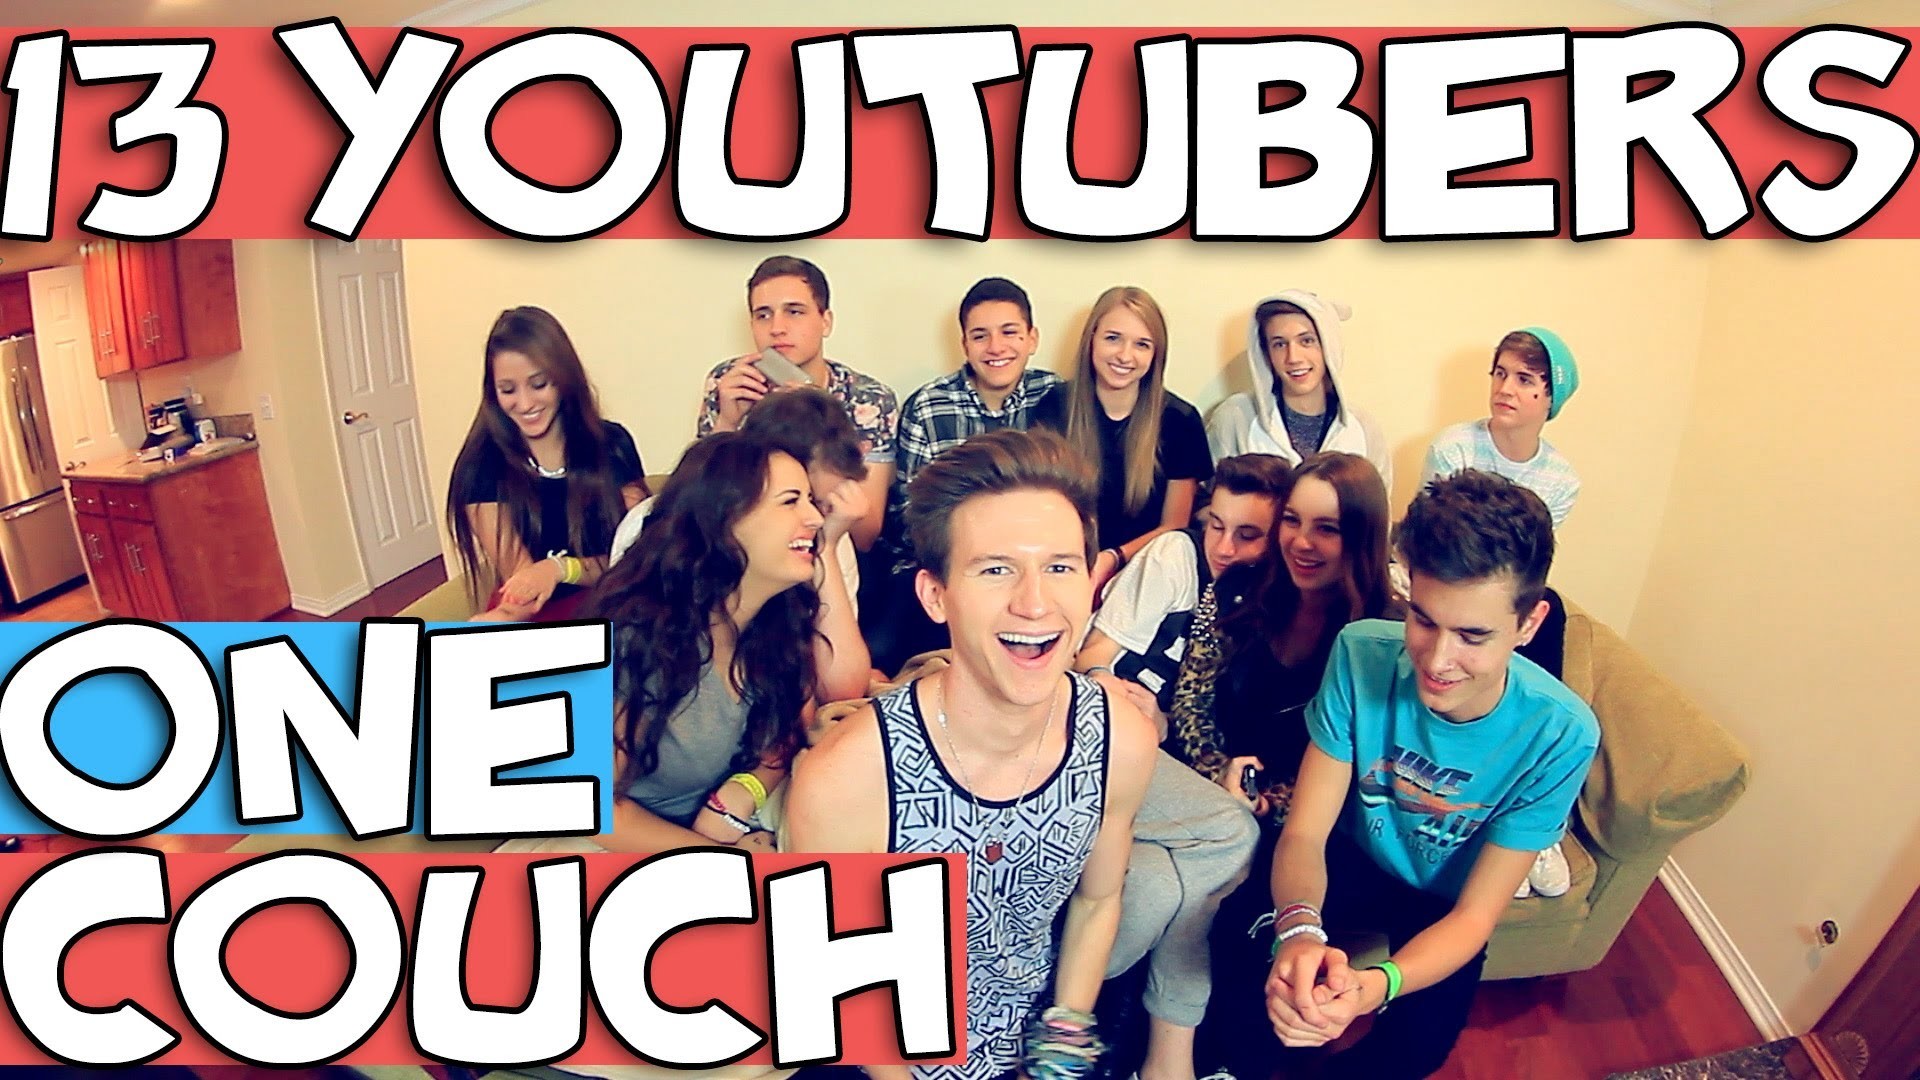 13 Youtubers One Couch Ricky Dillon Youtube 1920x1080